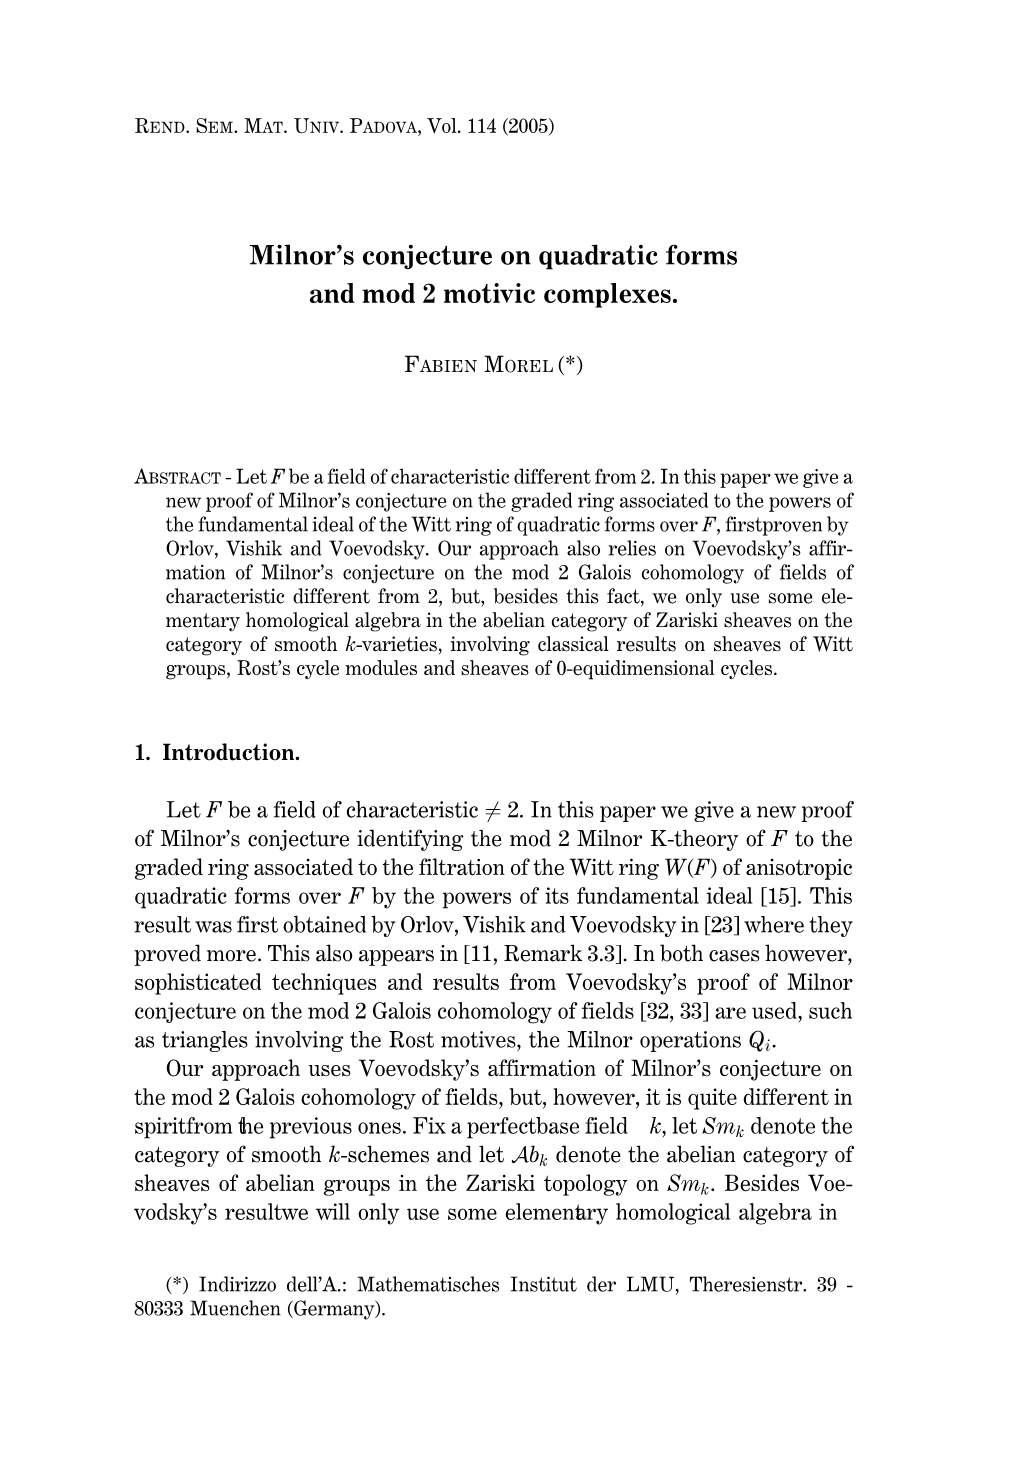 Milnor's Conjecture on Quadratic Forms and Mod 2 Motivic Complexes